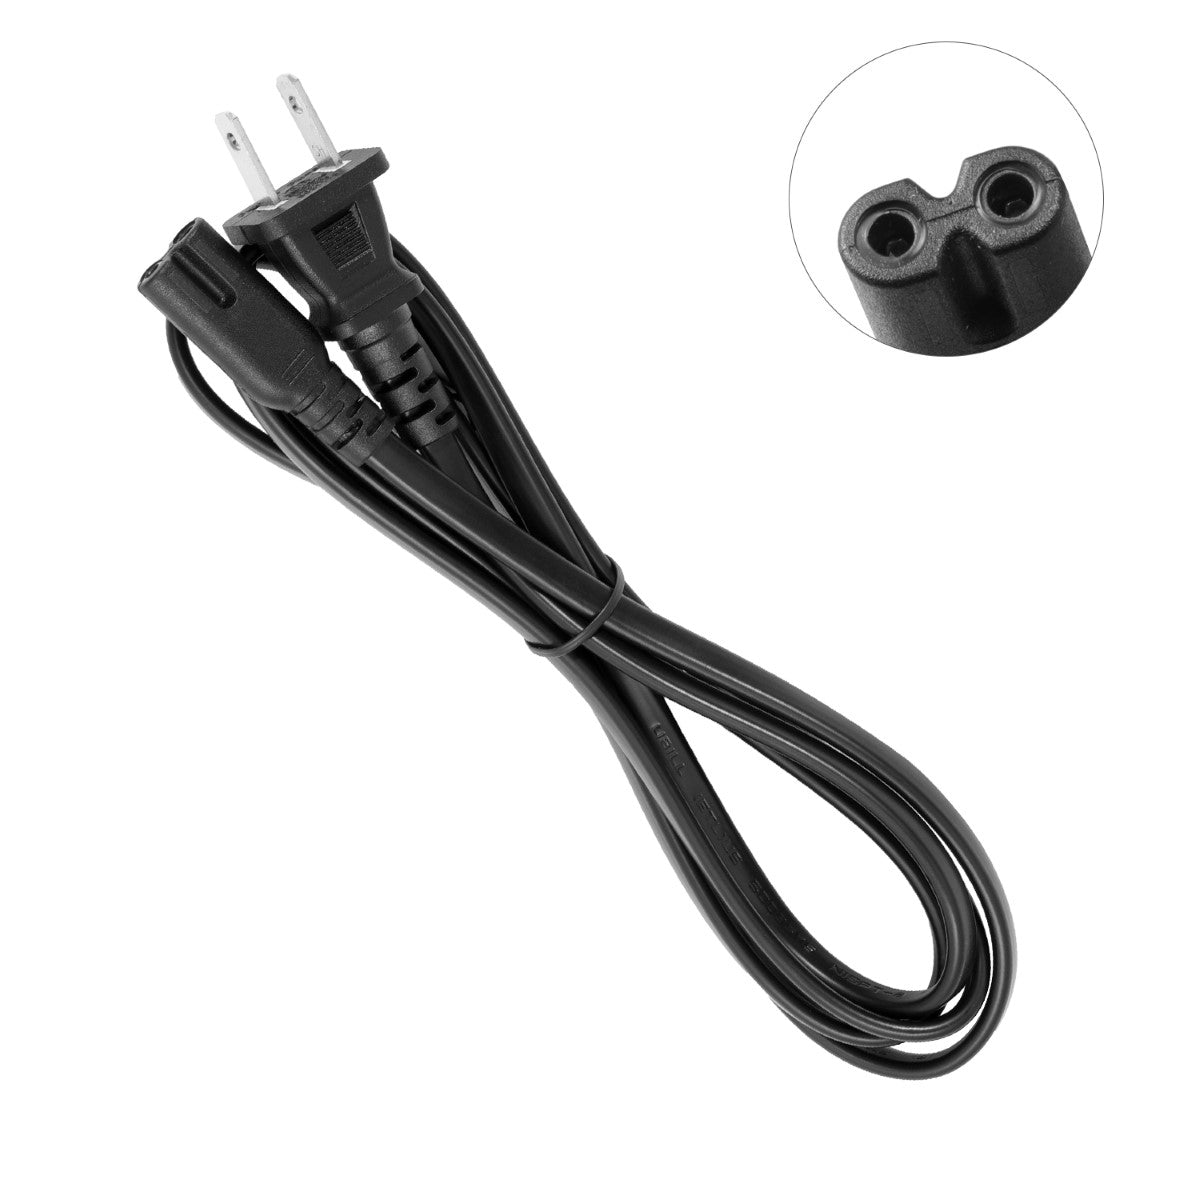 Power Cord for HP Officejet Pro X551dw Printer.